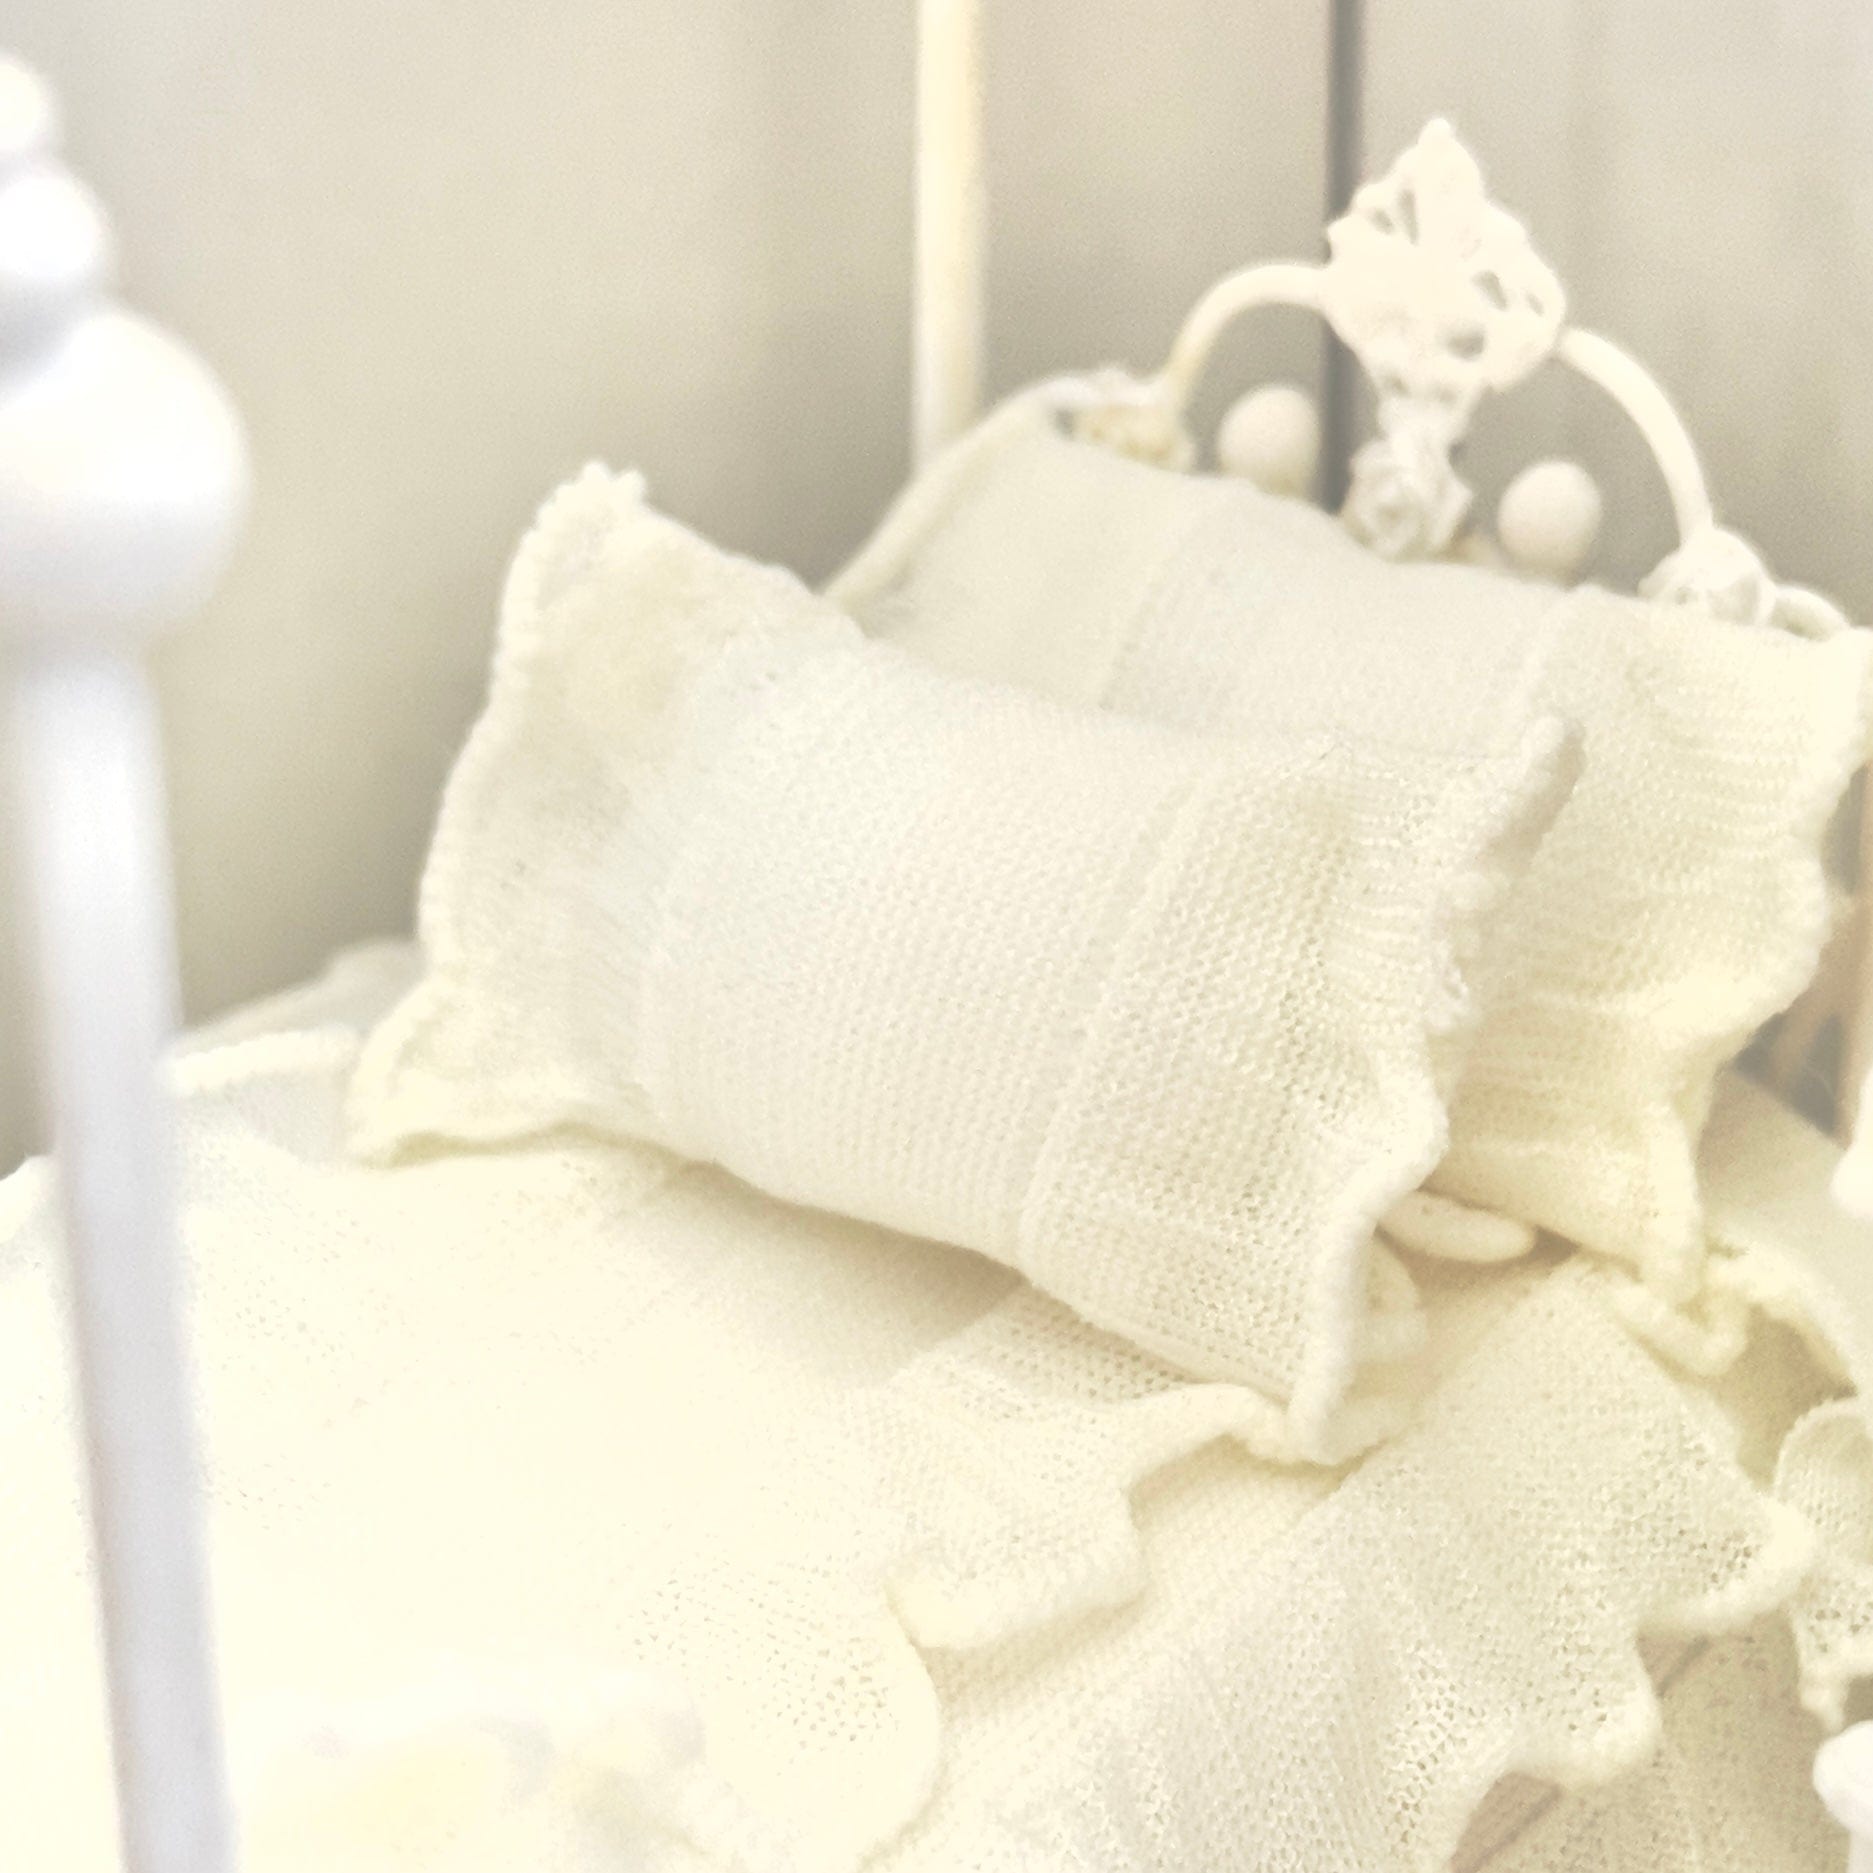 CHANTALLENA 1:24 Scale |  Three Piece Off White Linen Blend with Crocheted Throw Dollhouse Bedding Set | Pink Petite